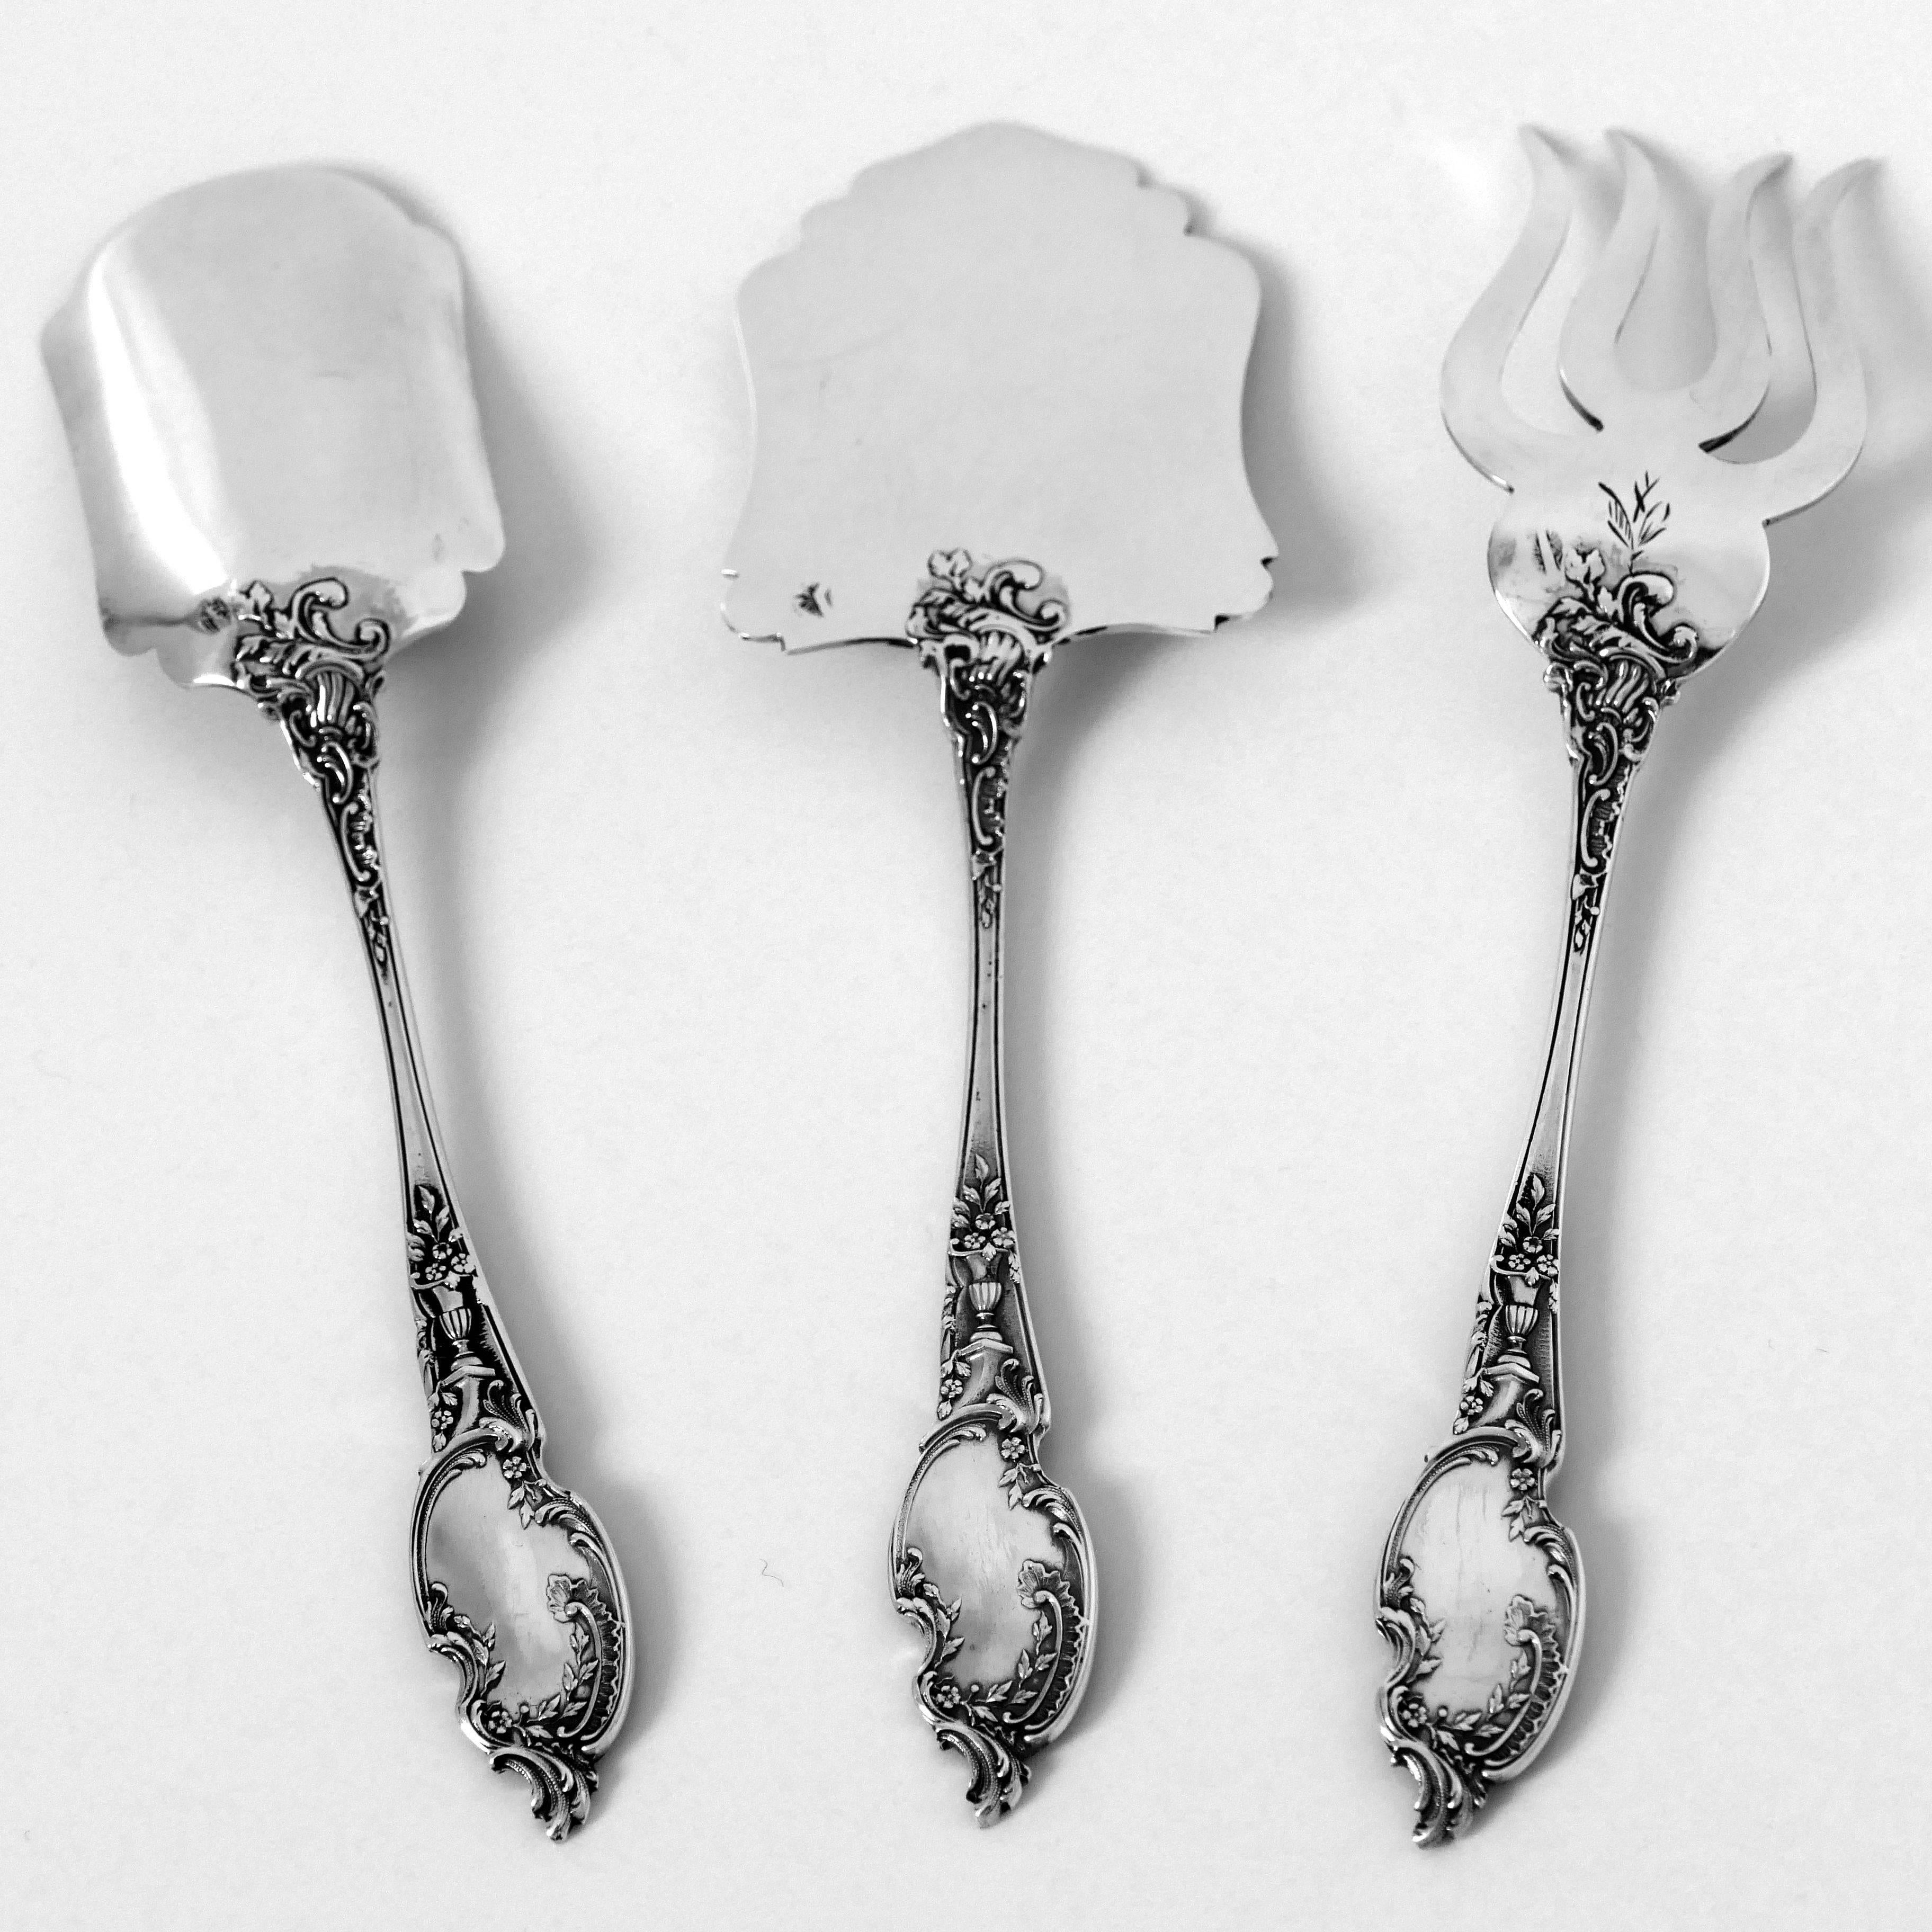 Boivin French Sterling Silver Dessert Hors D'oeuvre Set Four Pieces Original Box In Good Condition For Sale In TRIAIZE, PAYS DE LOIRE